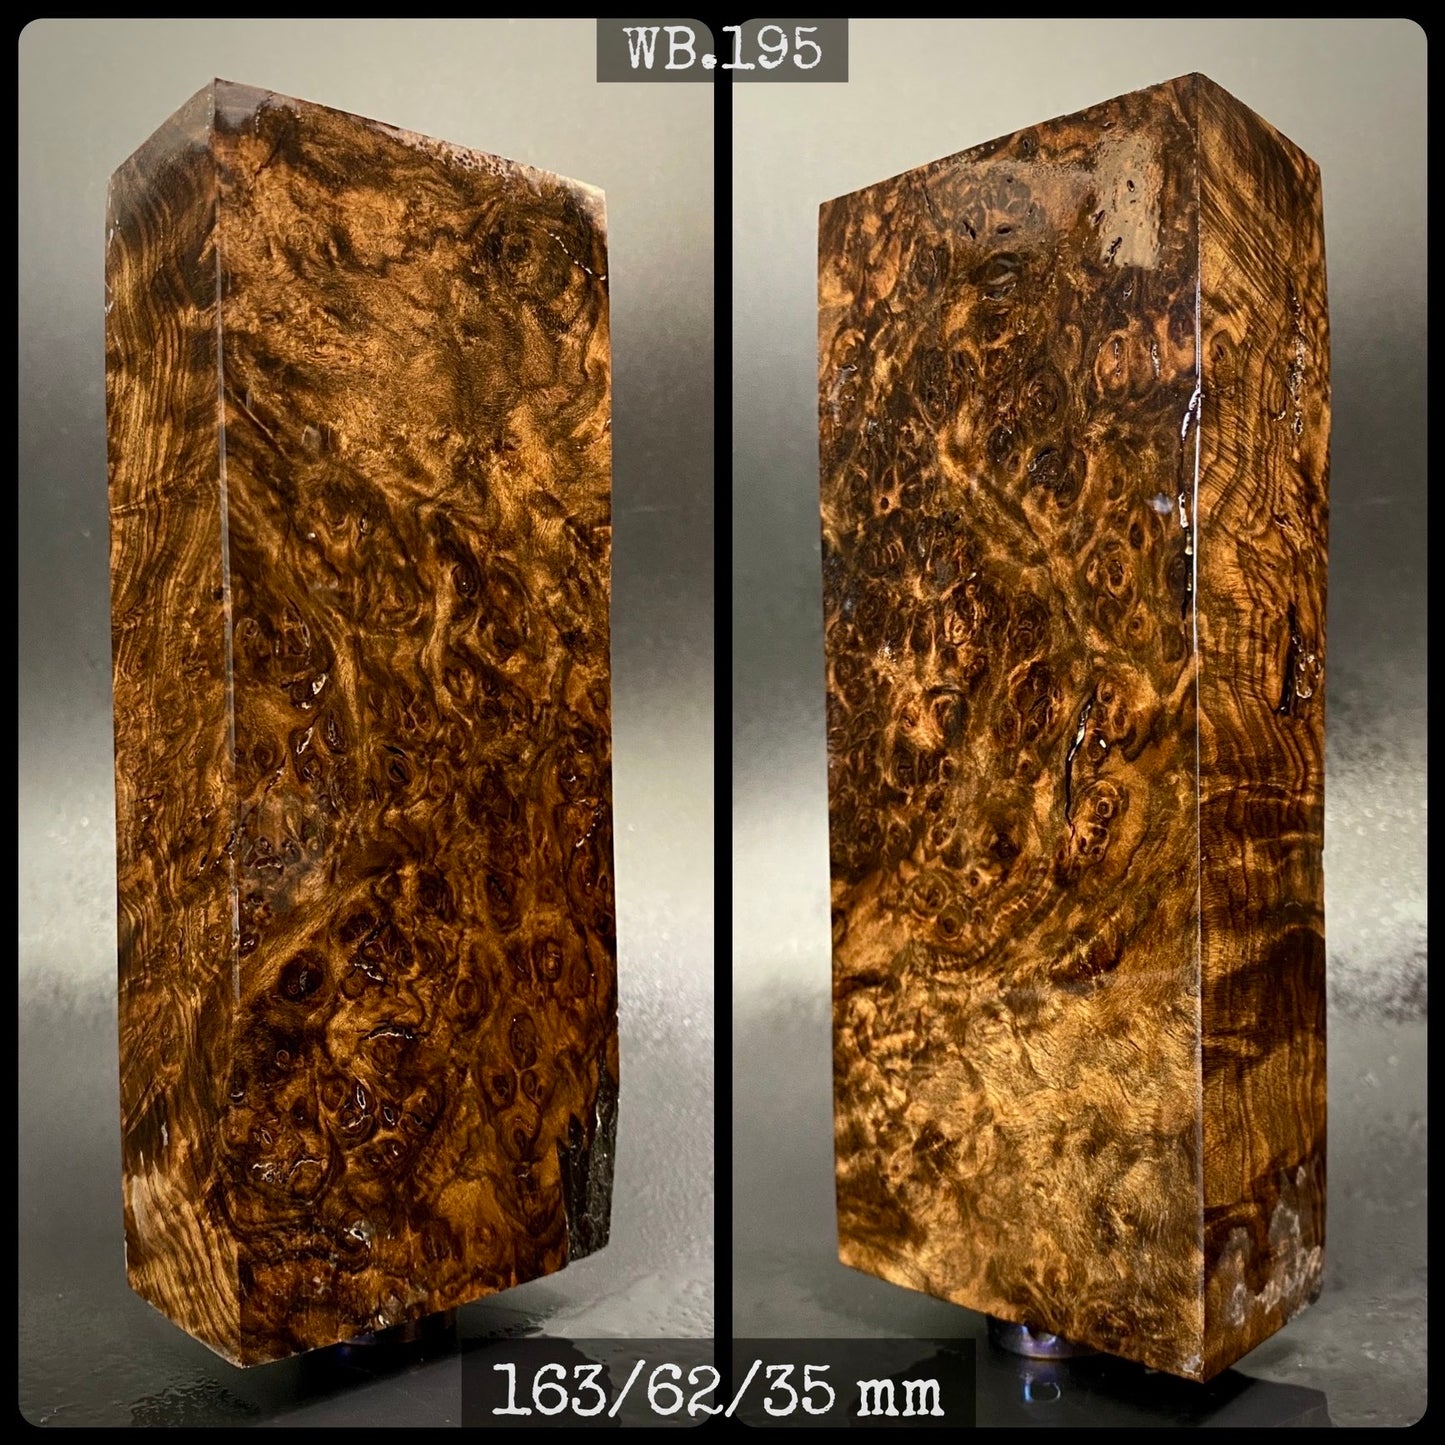 WALNUT BURL Stabilized Wood Very Rare, Blanks for Crafting, Knife Making. France Stock. WB.195